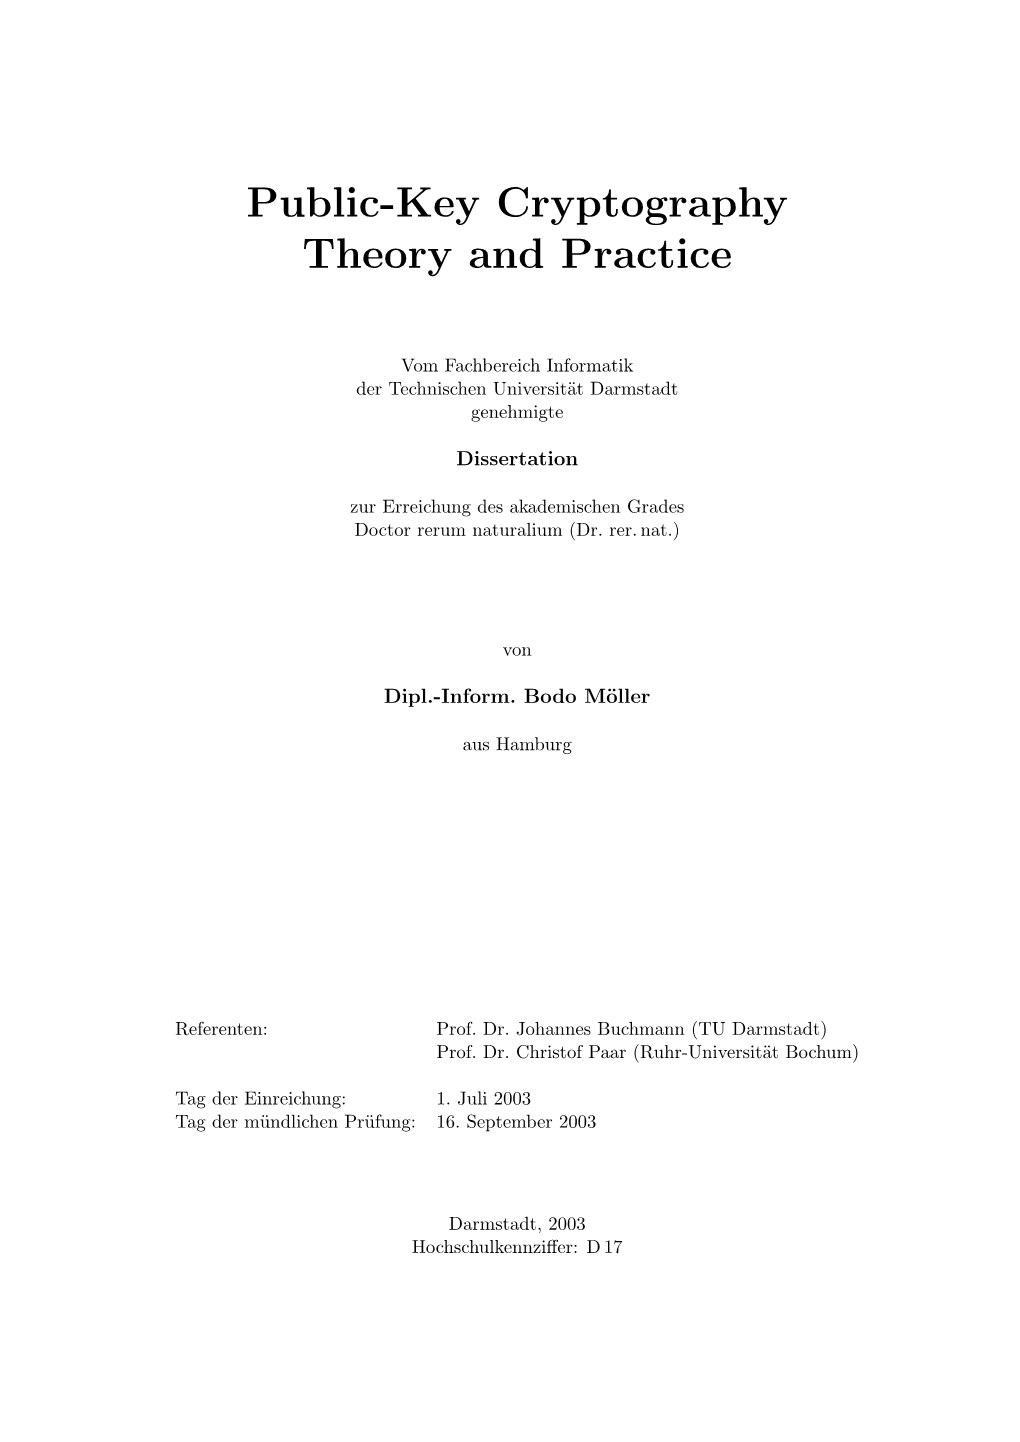 Public-Key Cryptography Theory and Practice